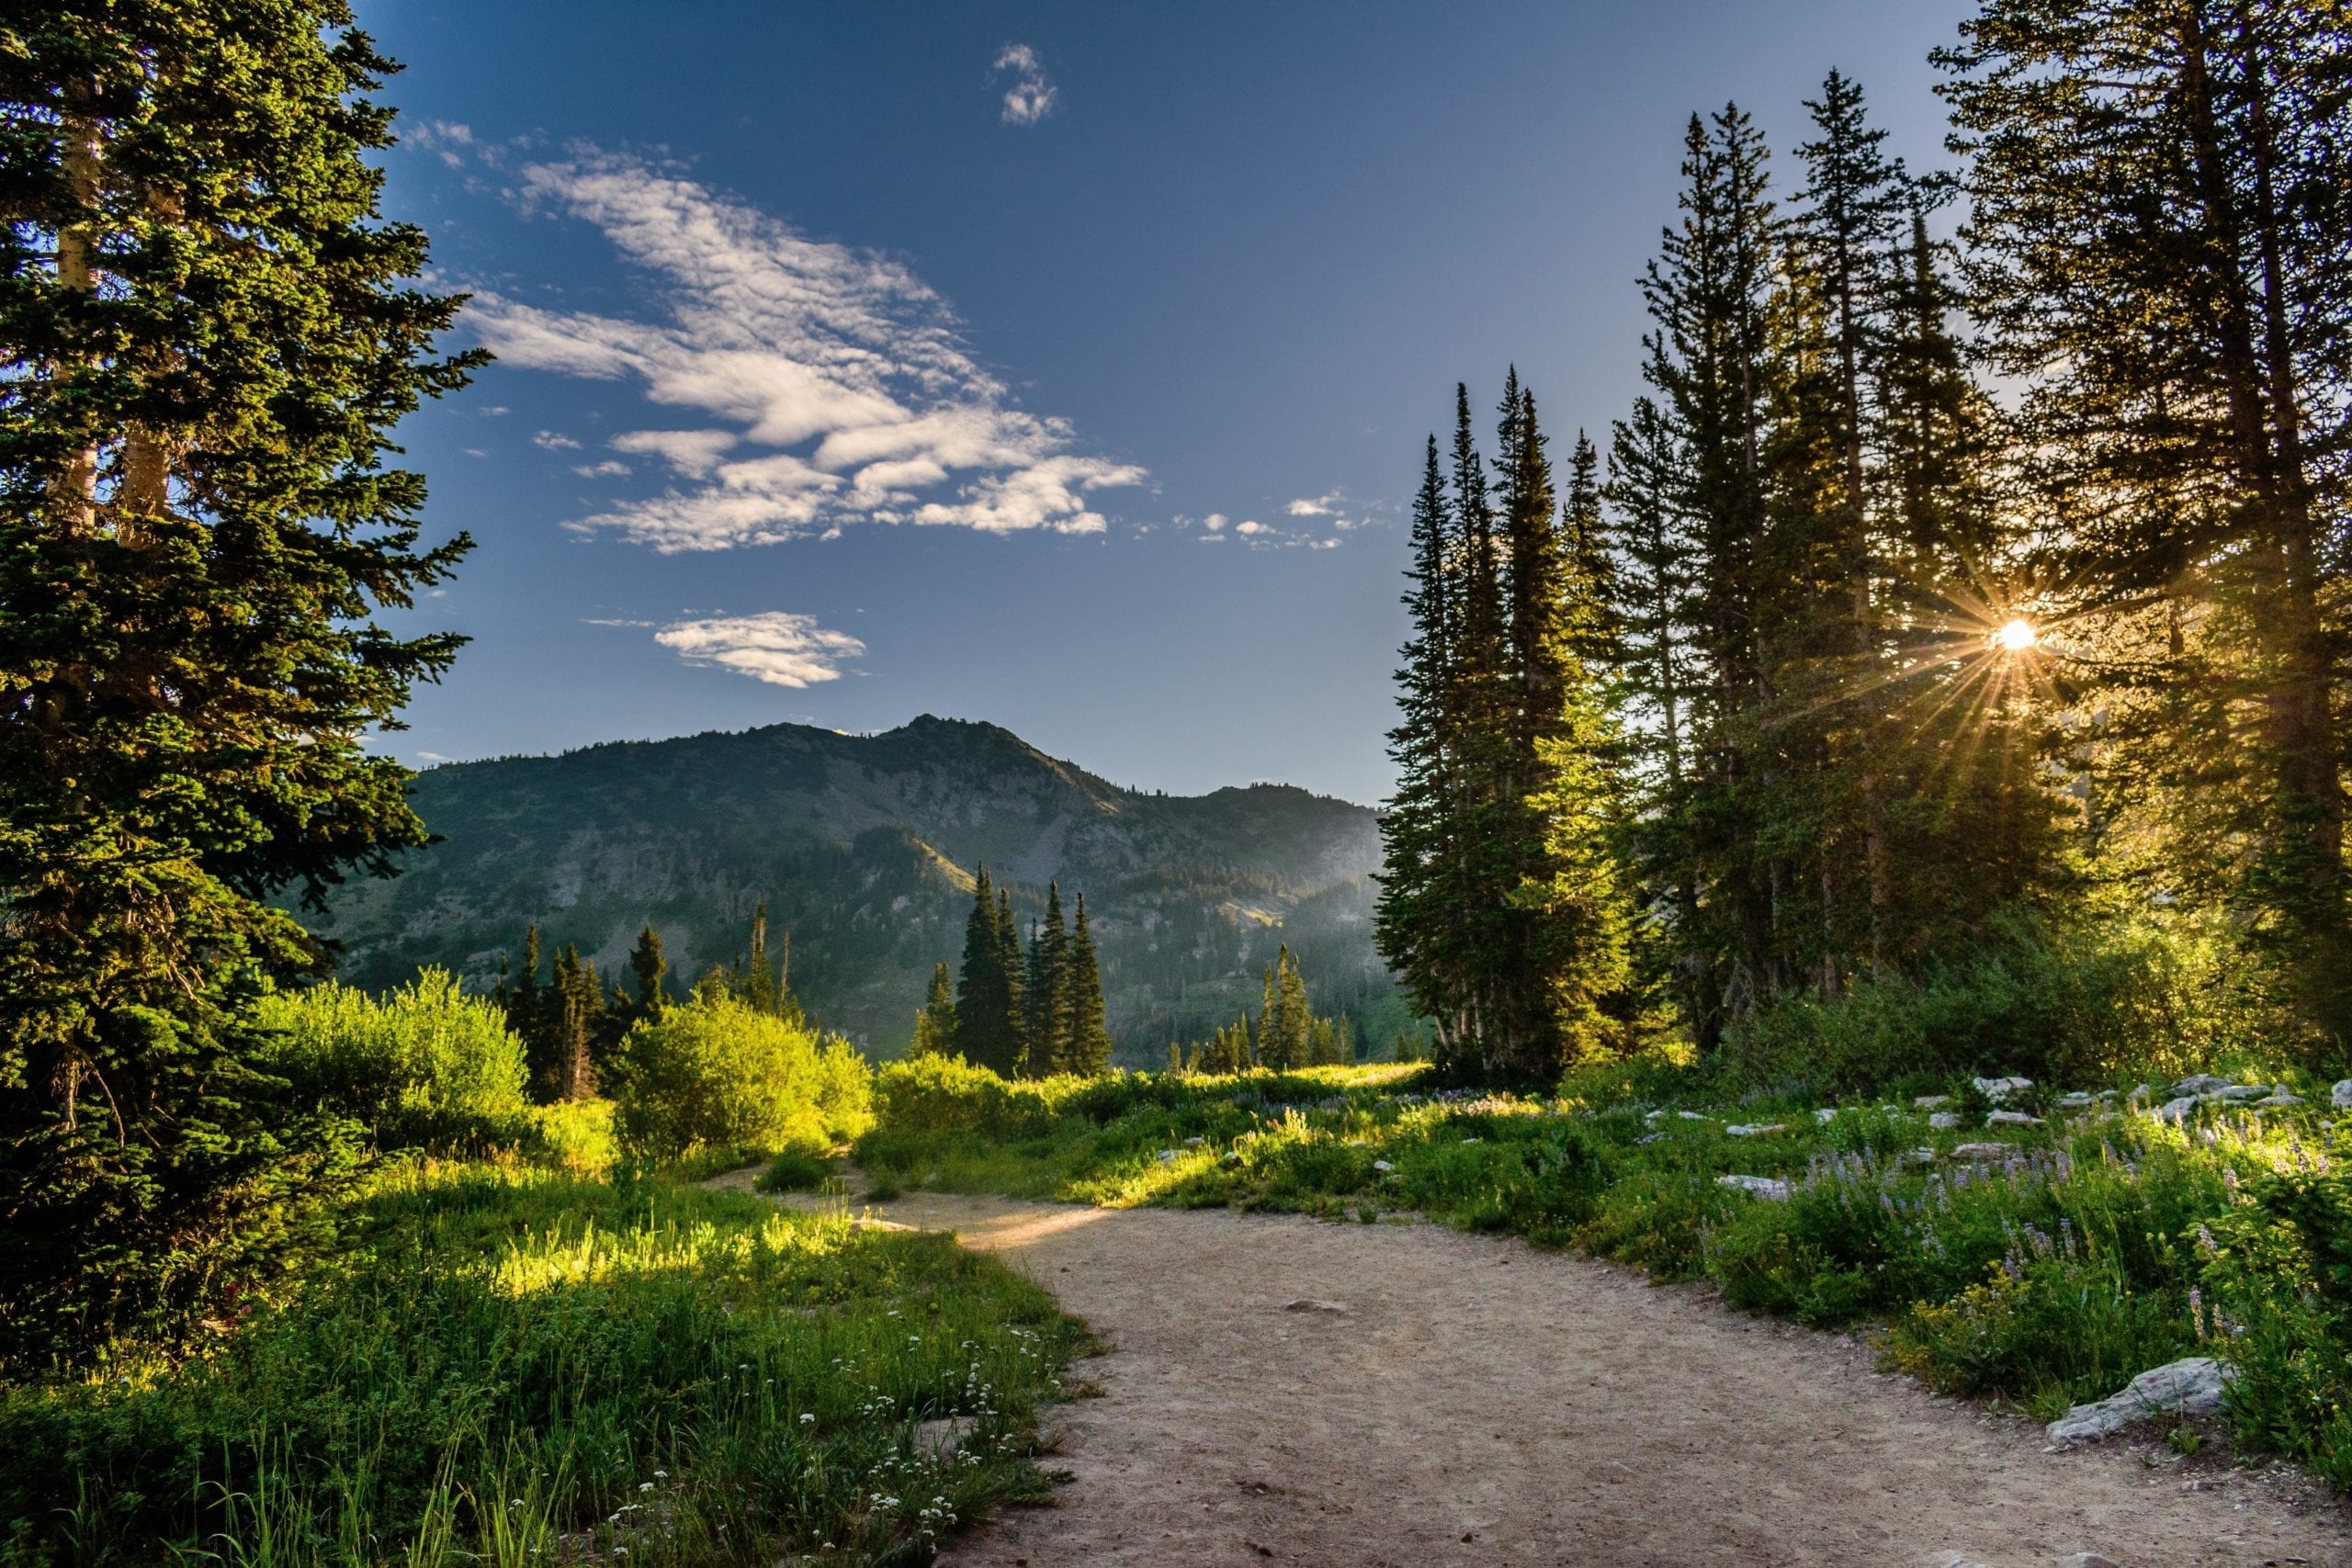 Lush green forest trail with mountains in background and sun peeking through trees, highlighting the benefits of forest bathing and breast cancer